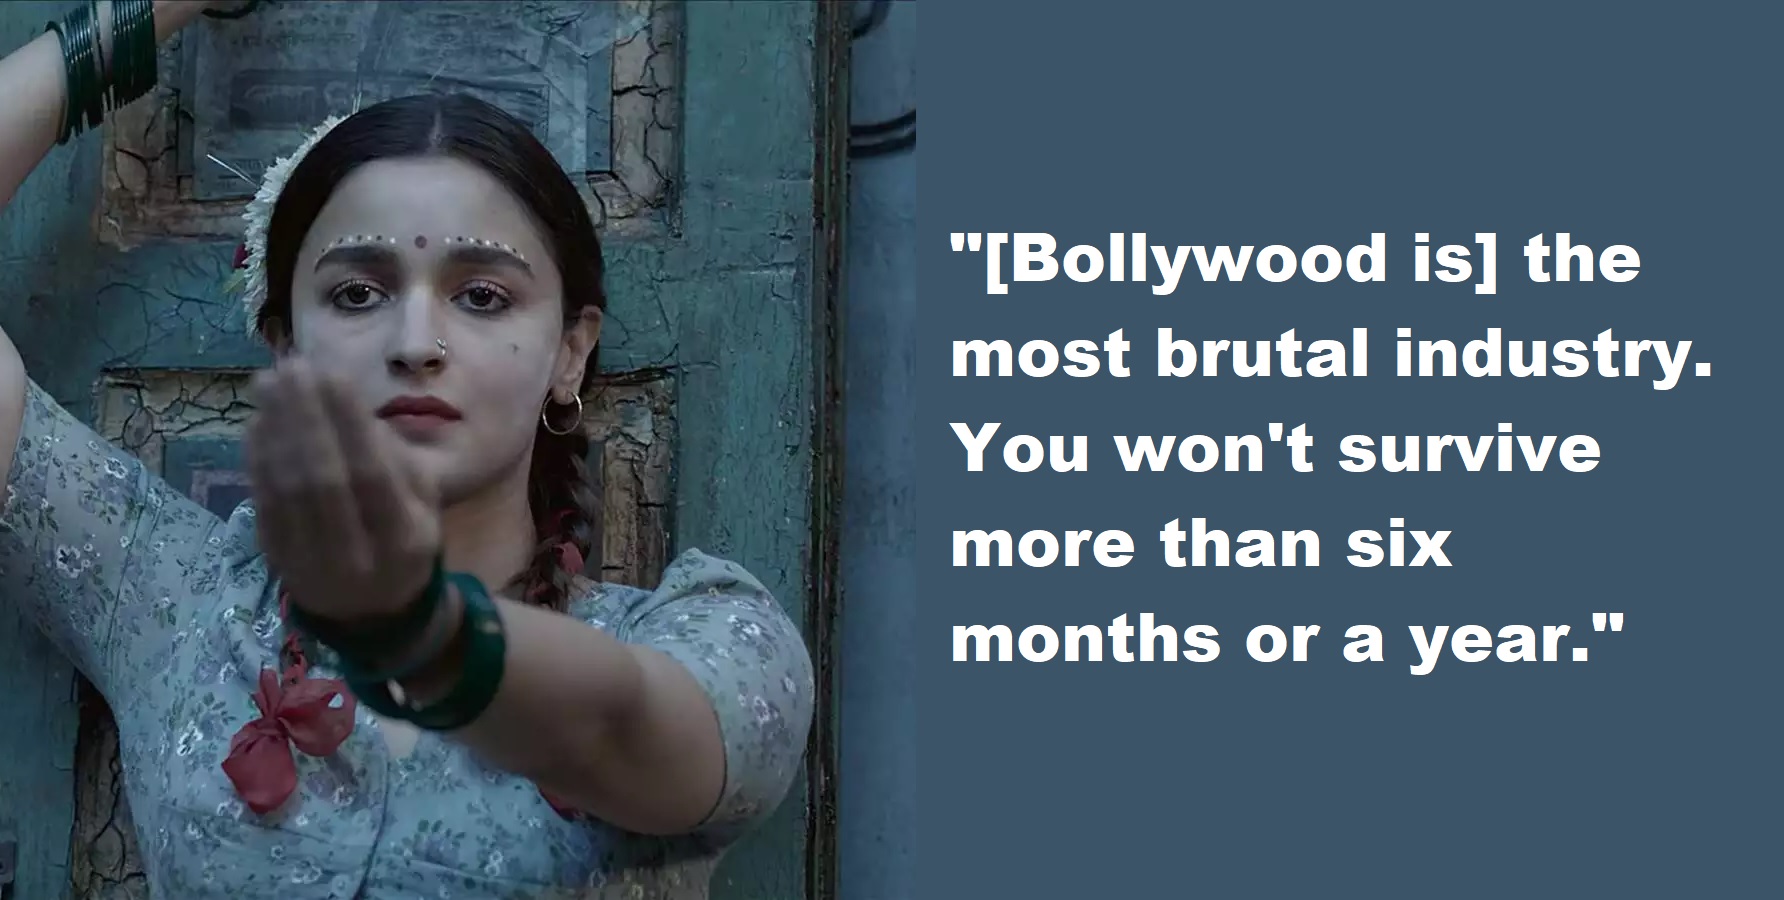 ‘Even Superstars Have To Work To Survive’ – Says Alia Bhatt On Bollywood